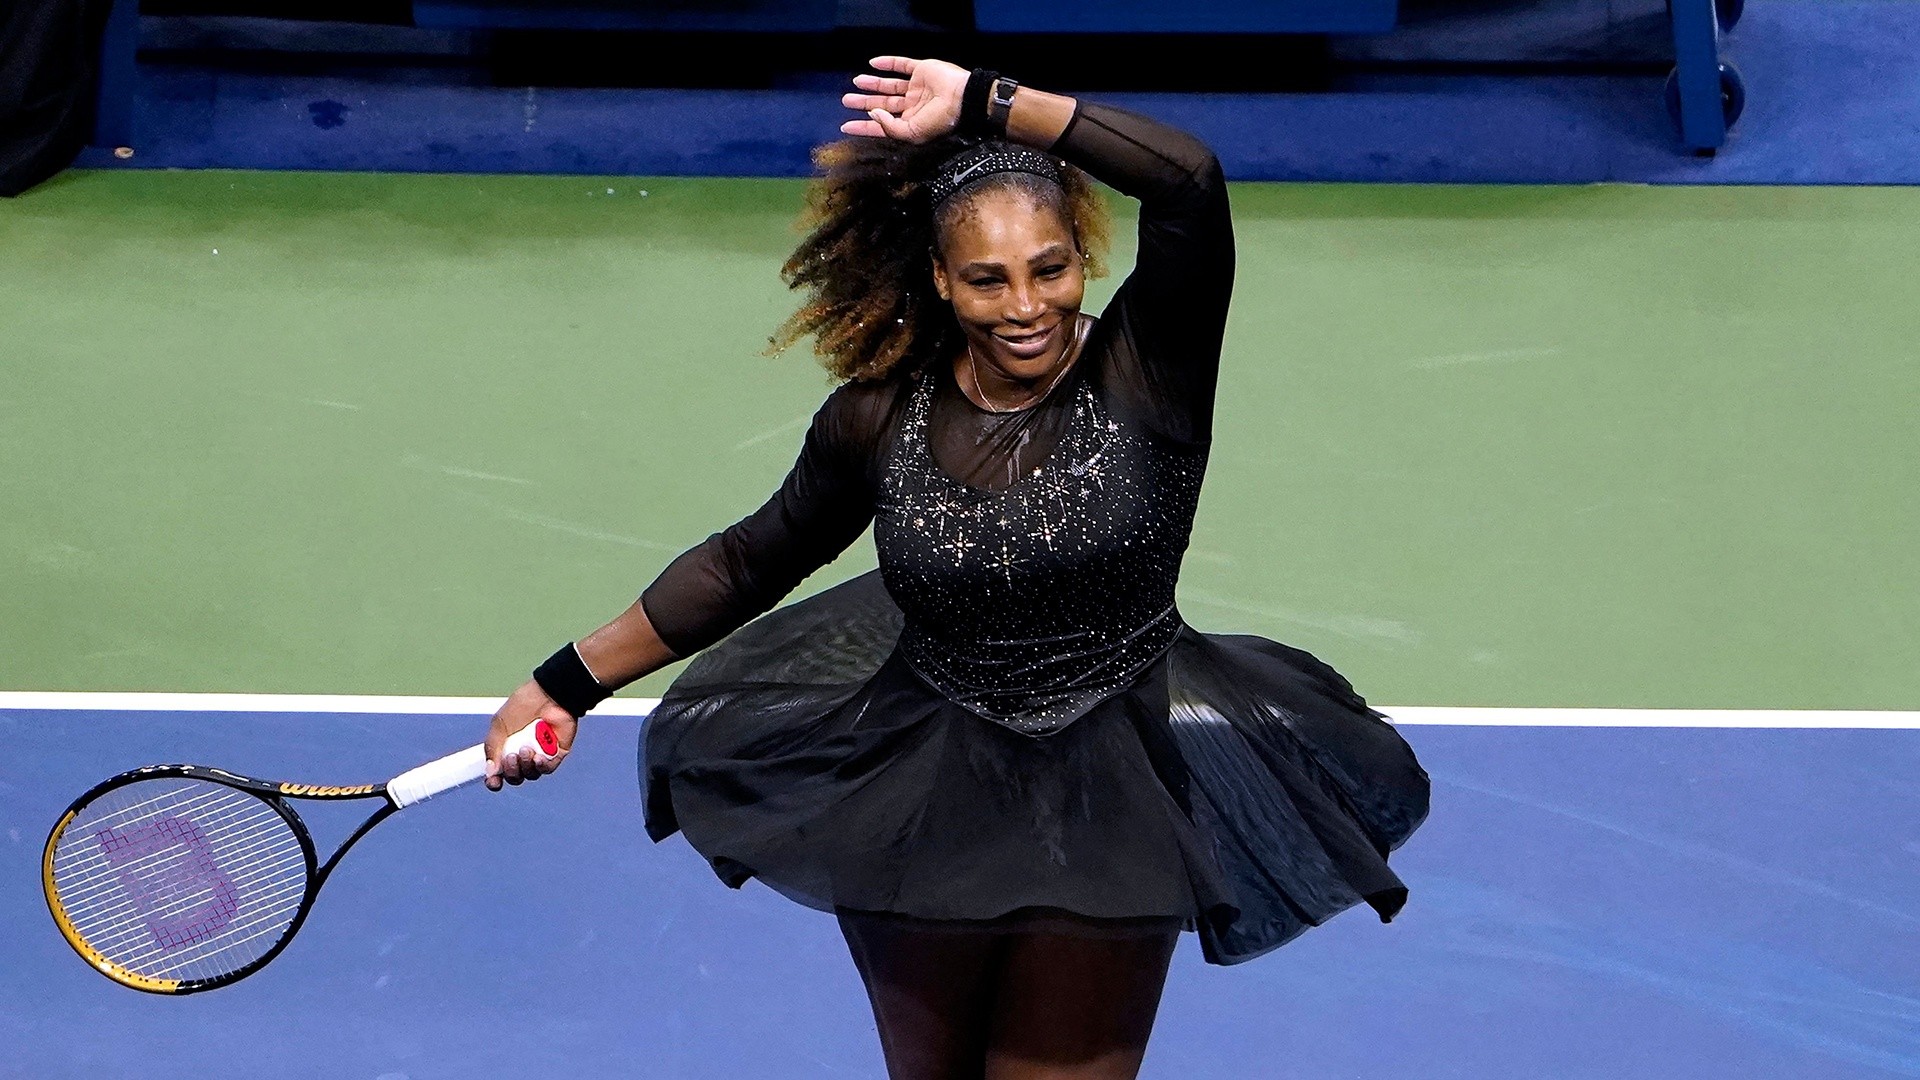 Serena Williams will impact women long after U.S